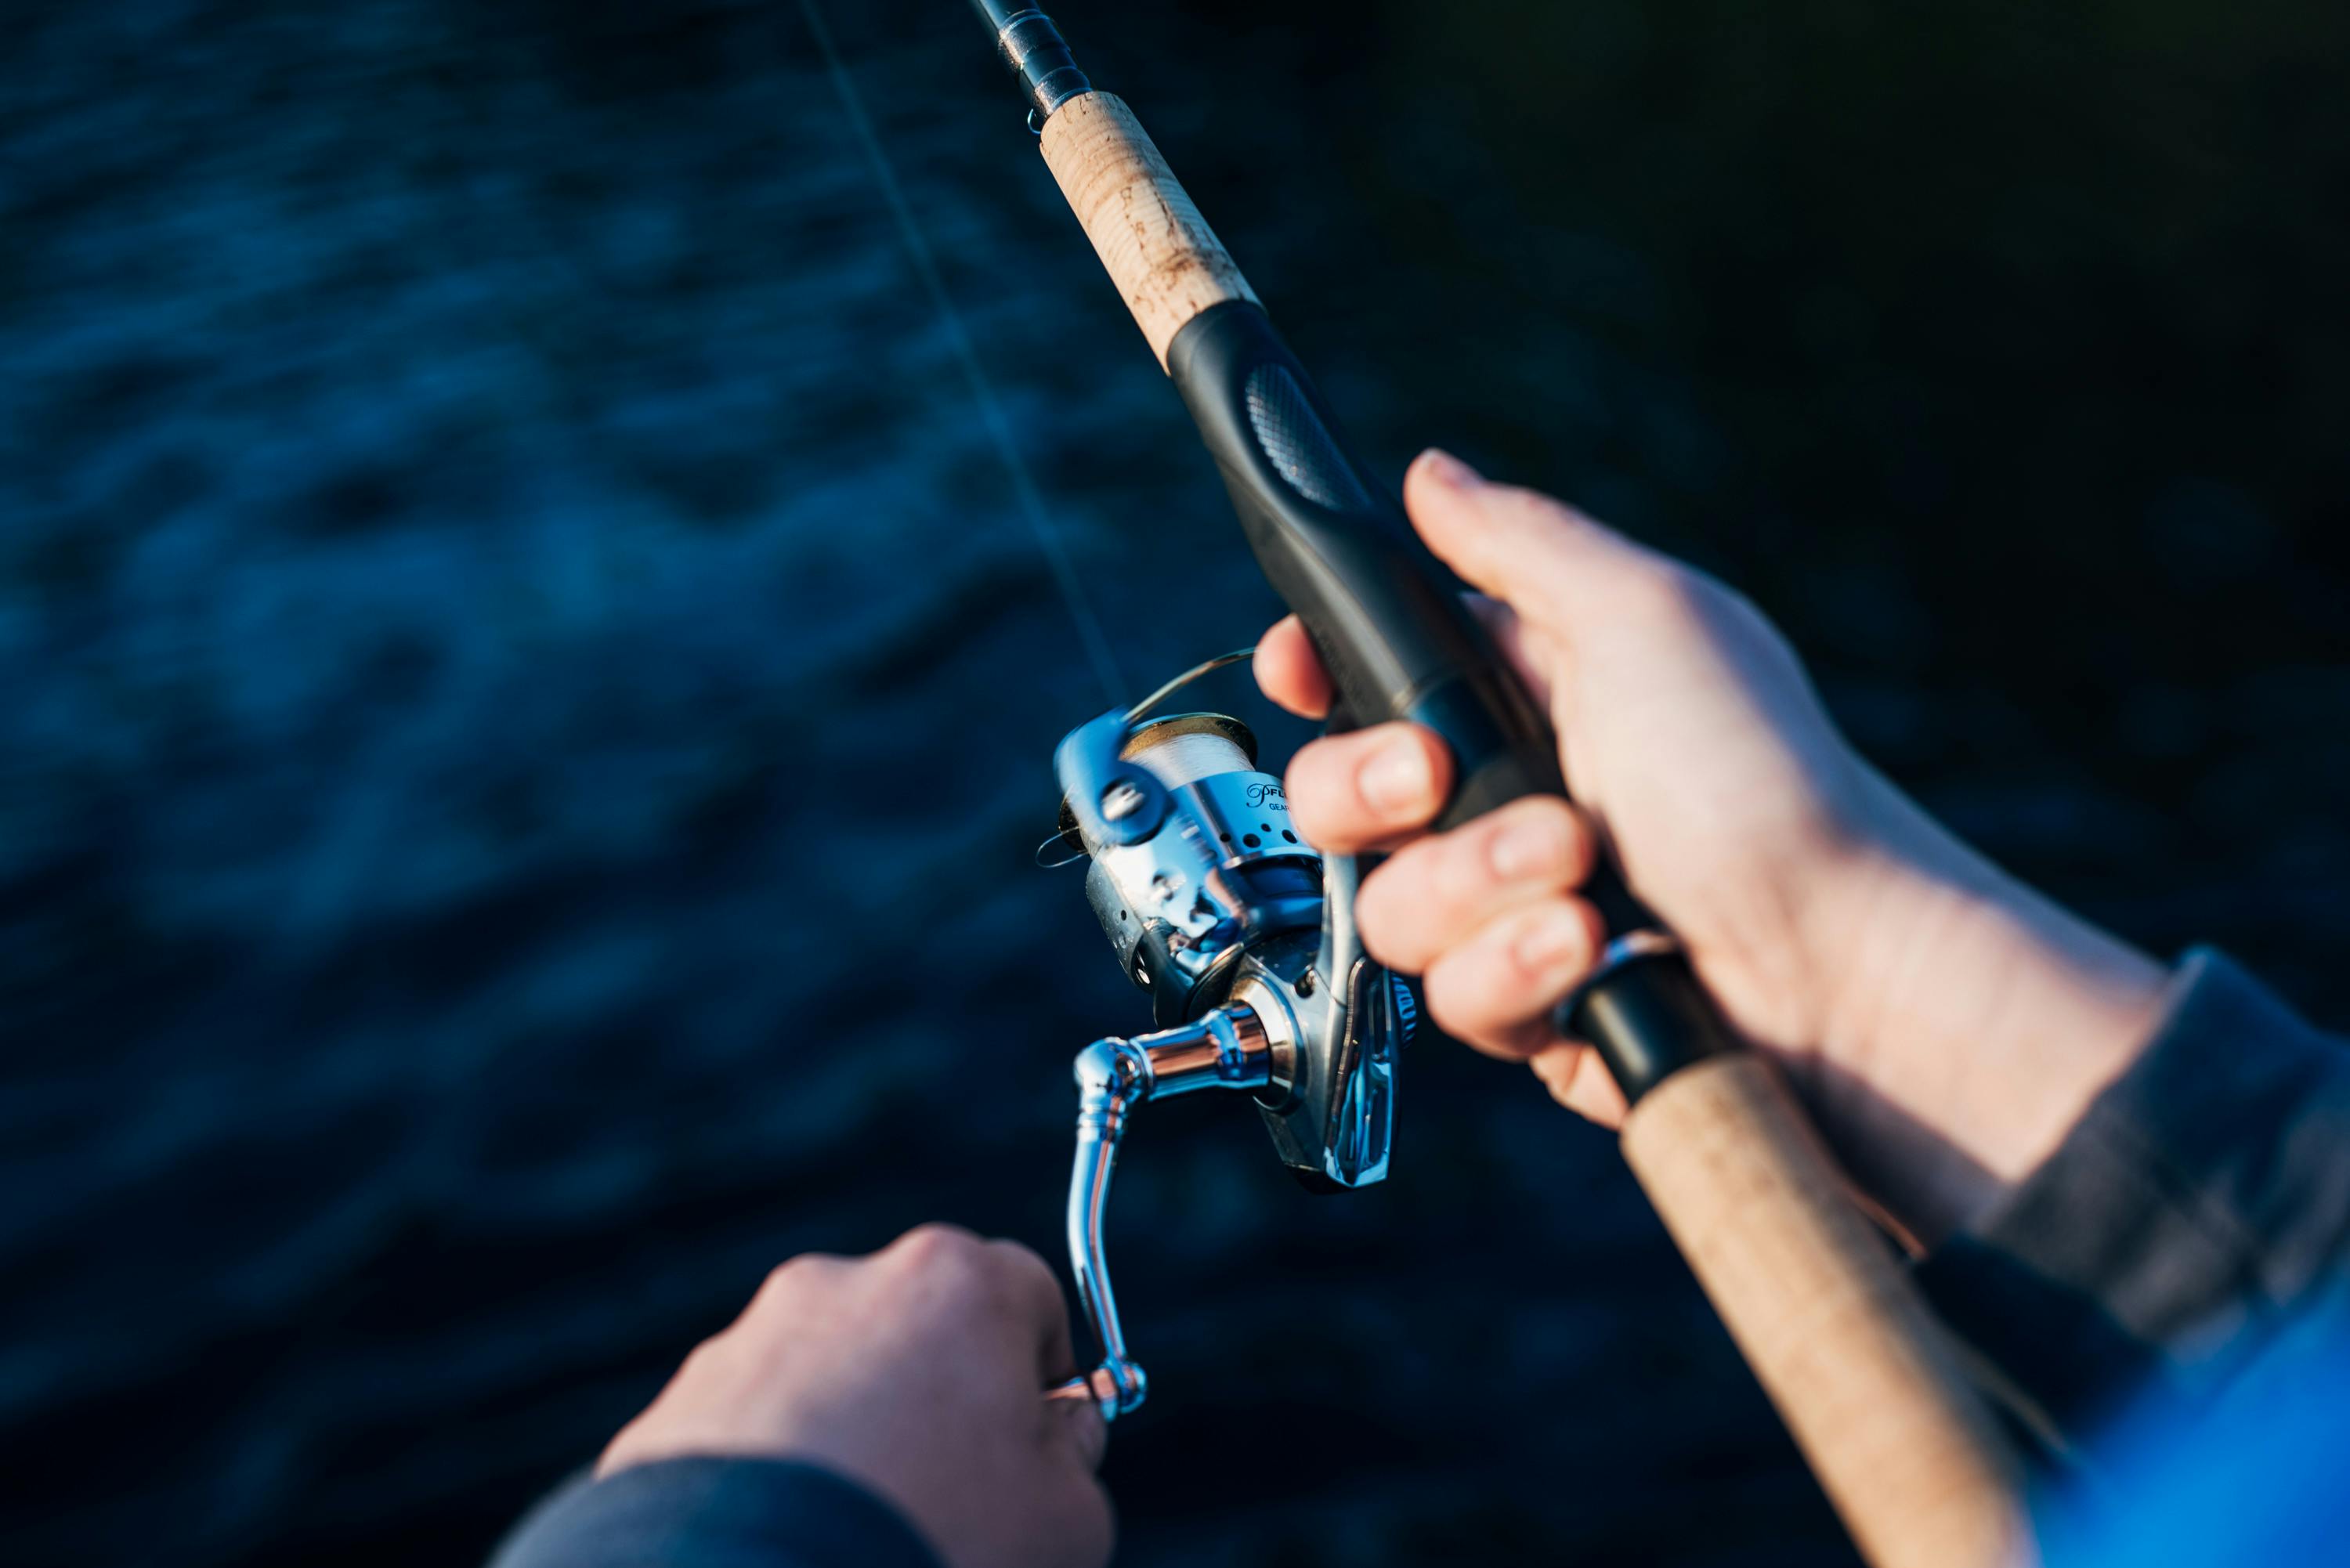 Fishing rod Free Stock Photos, Images, and Pictures of Fishing rod